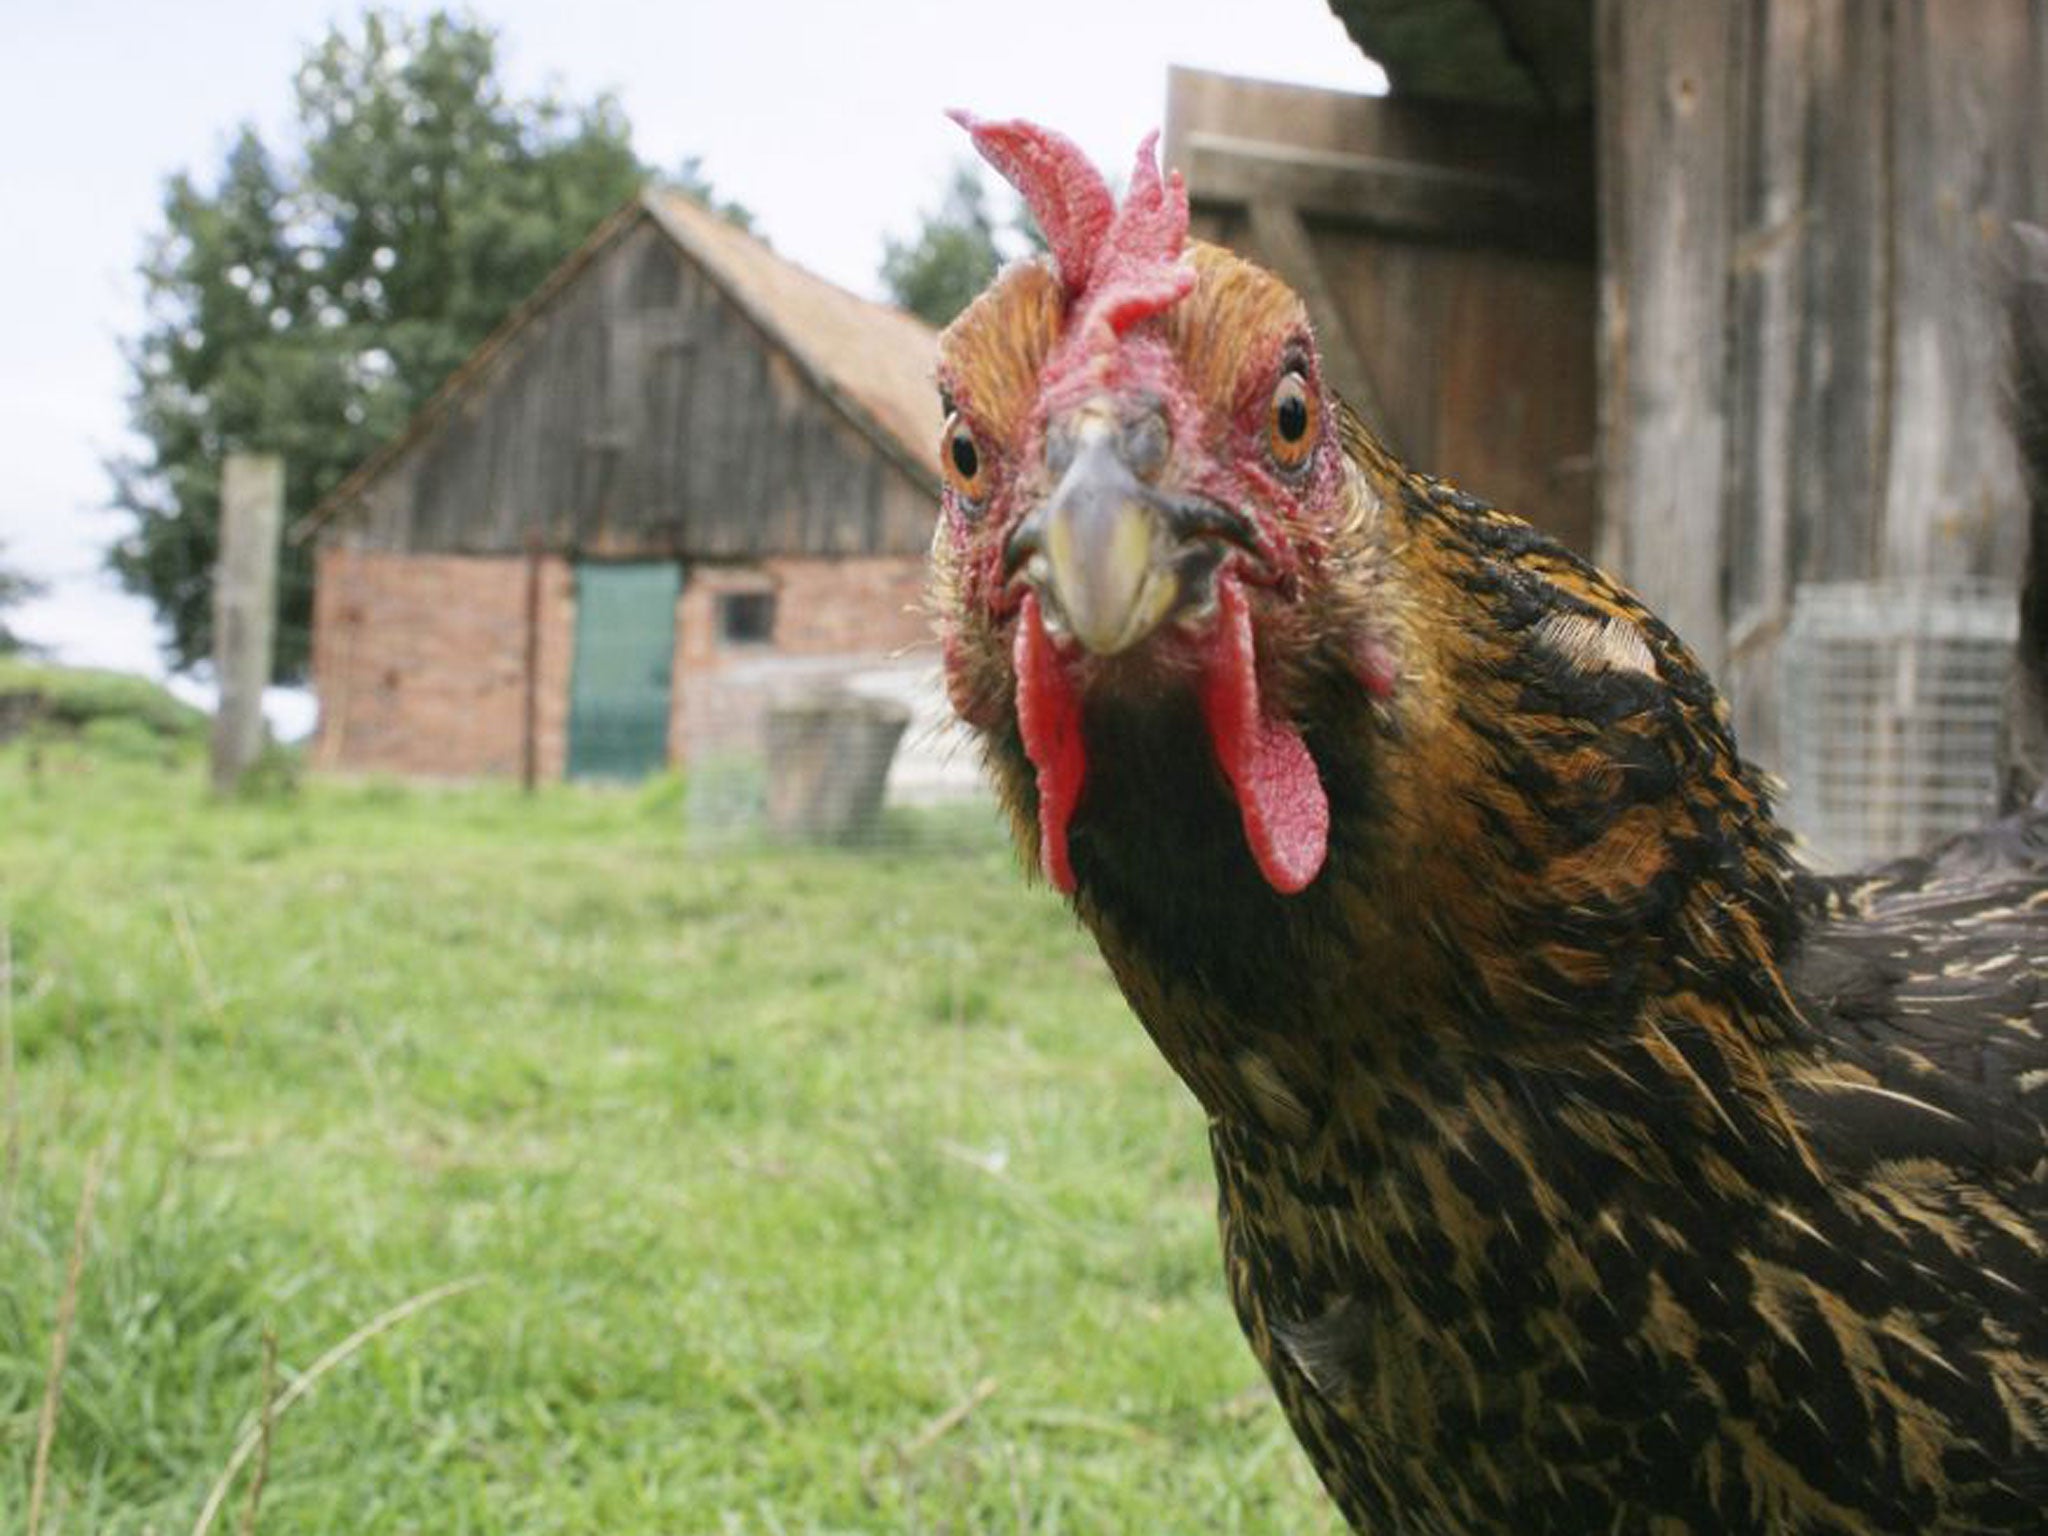 The Californian hens can look forward to a peaceful retirement on the east coast, thanks to a anonymous donor